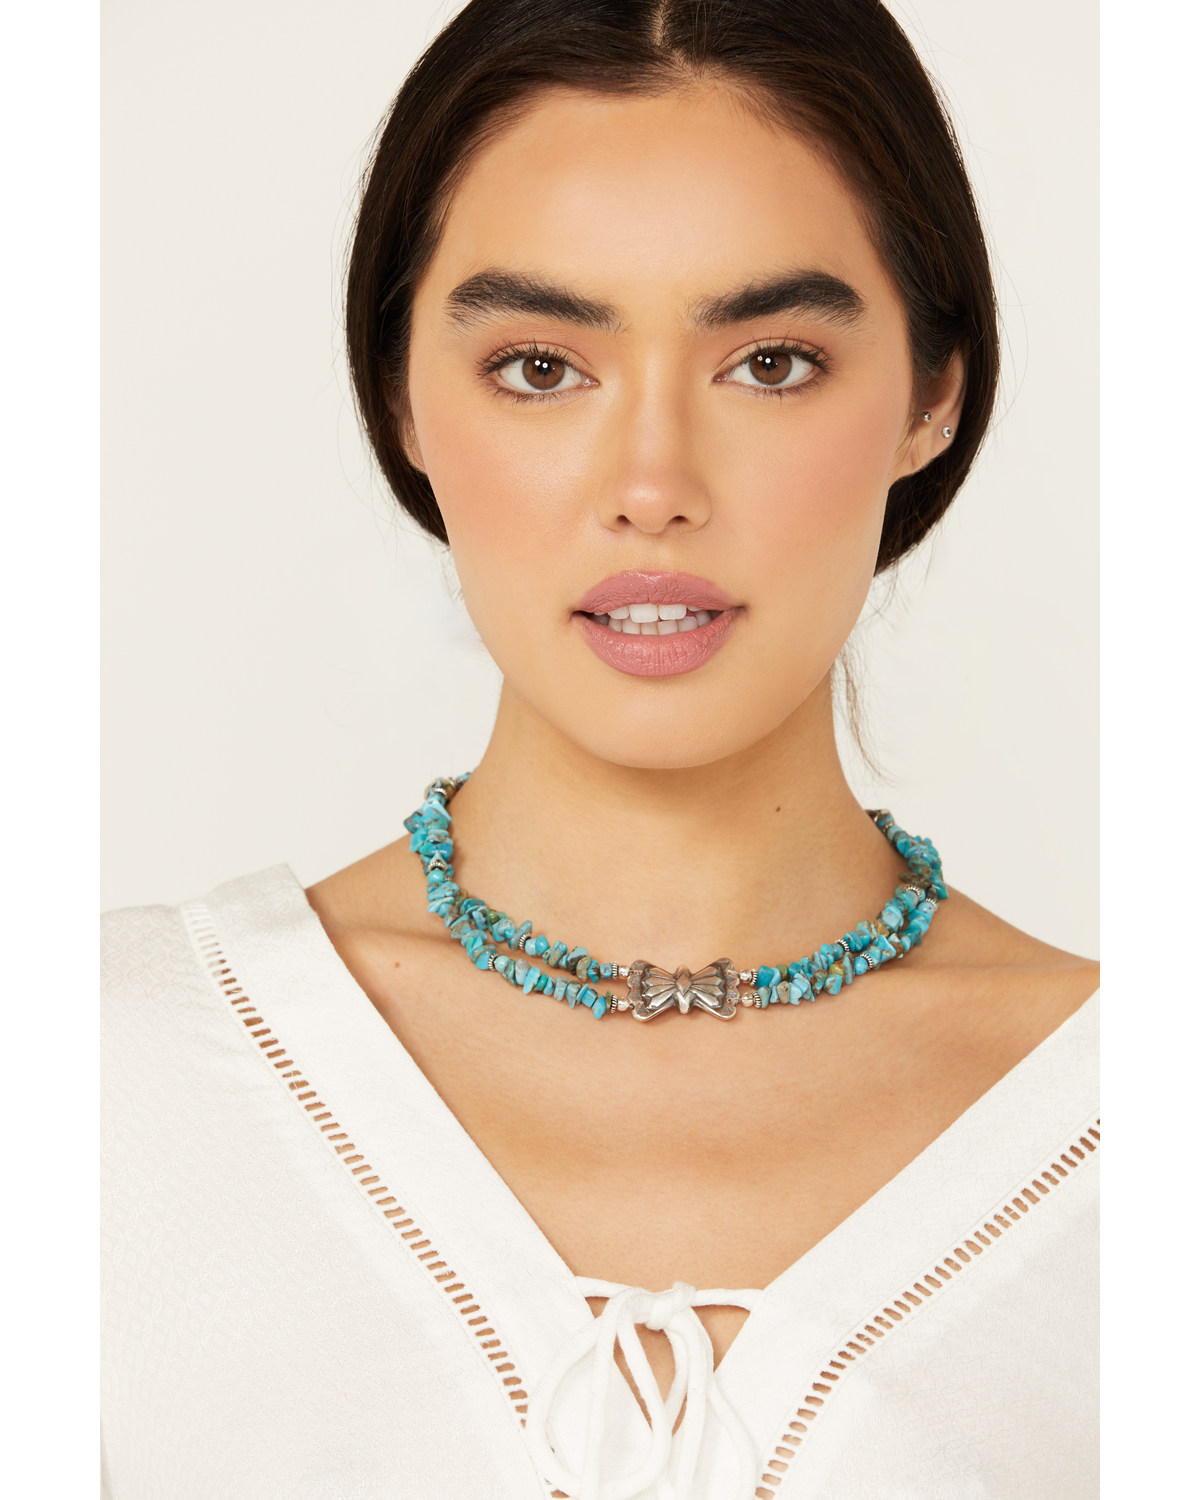 Paige Wallace Women's Bow Concho Turquoise Necklace